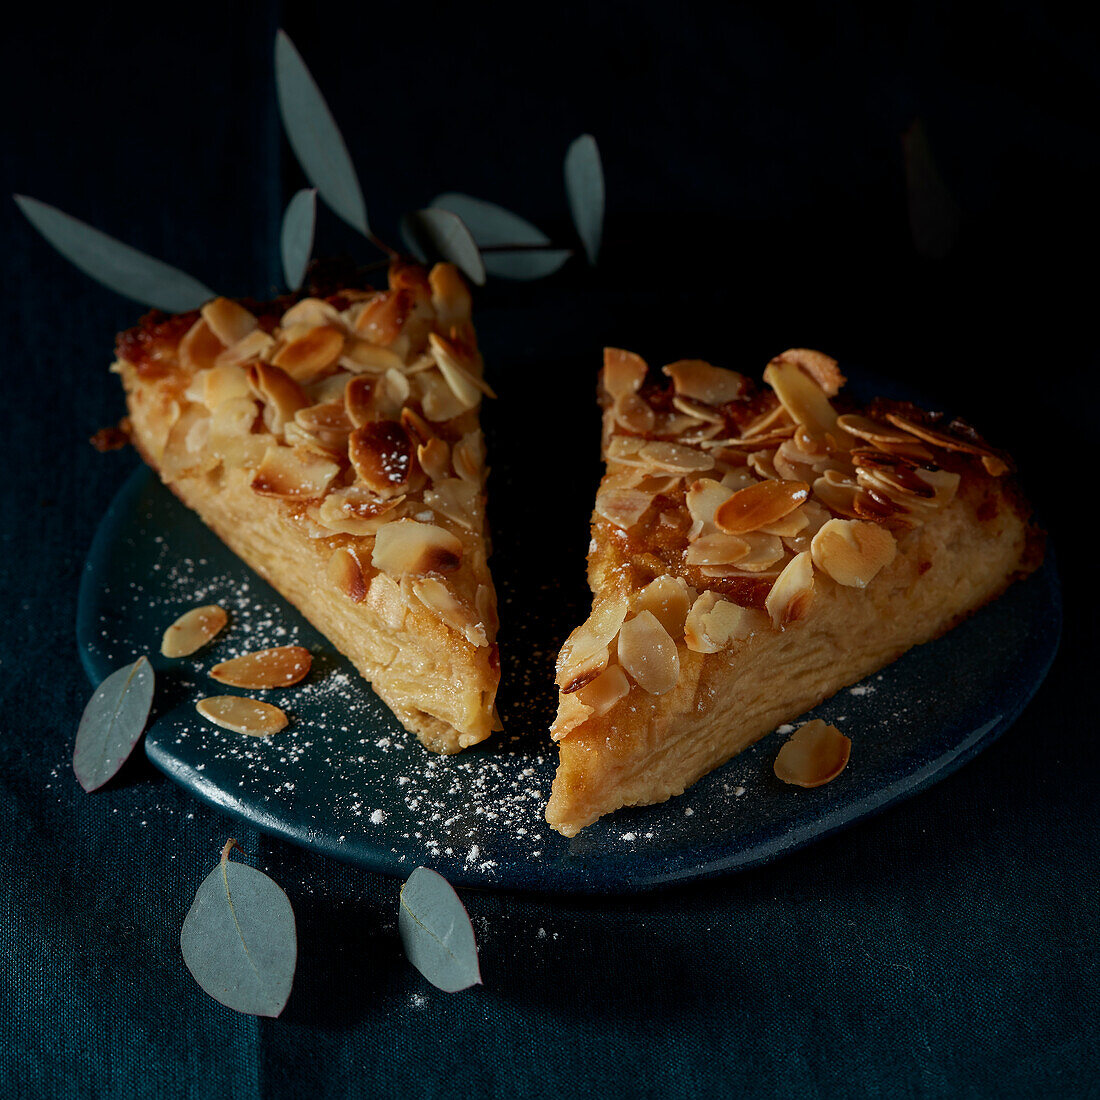 Gateau Invisible (French apple pie) with flaked almonds